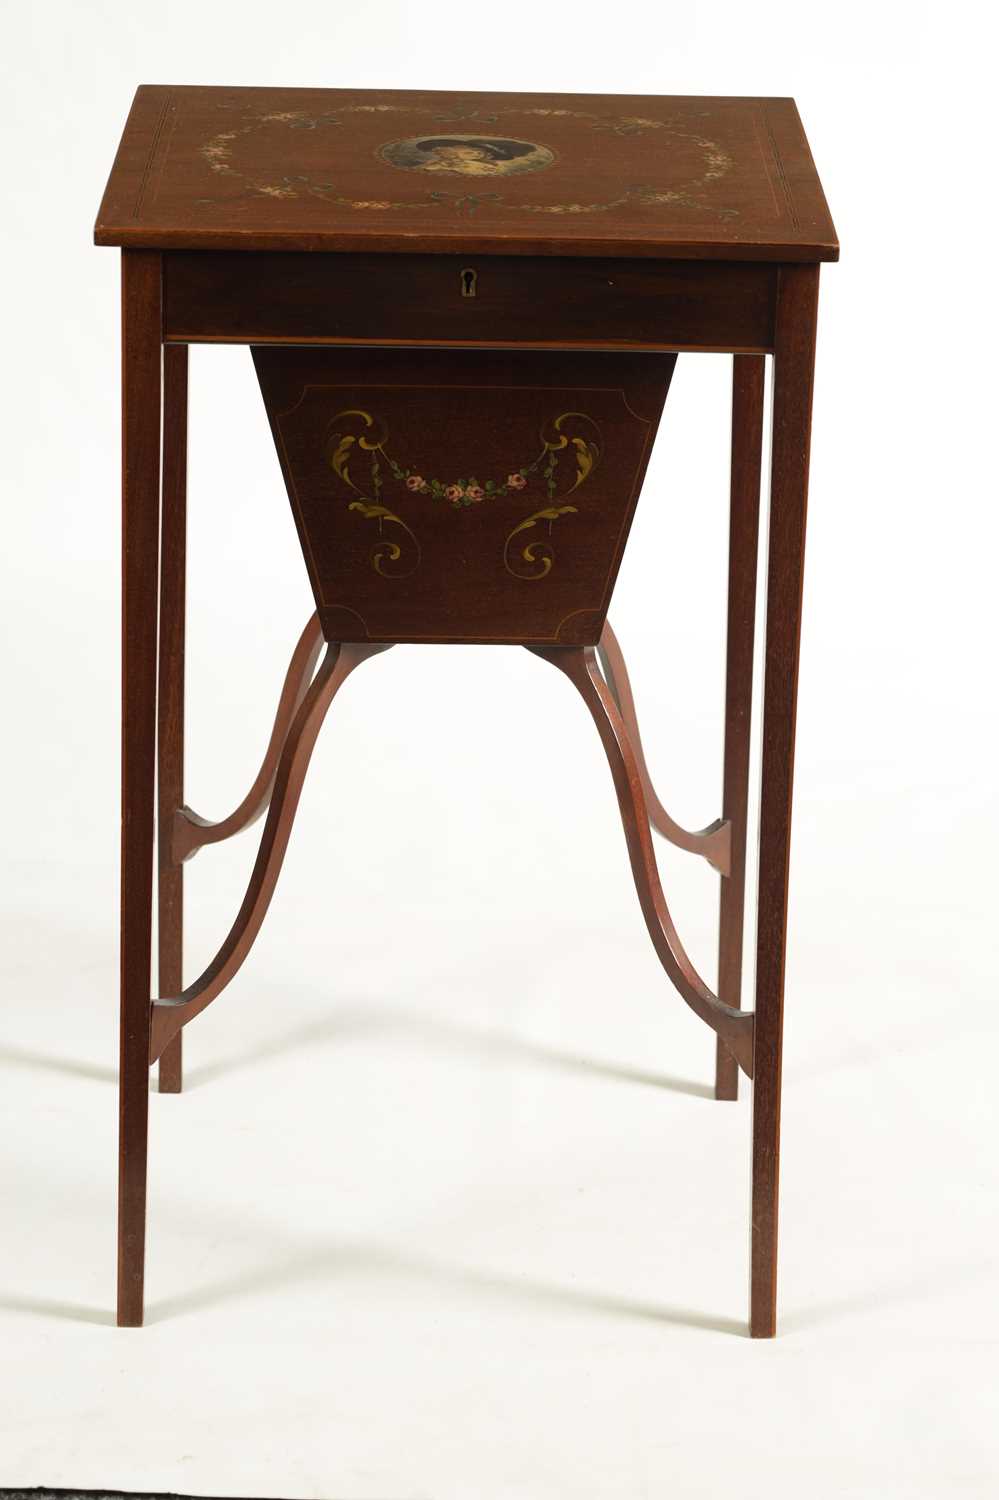 A 19TH CENTURY PAINTED MAHOGANY SHERATON STYLE WORK TABLE - Image 4 of 8